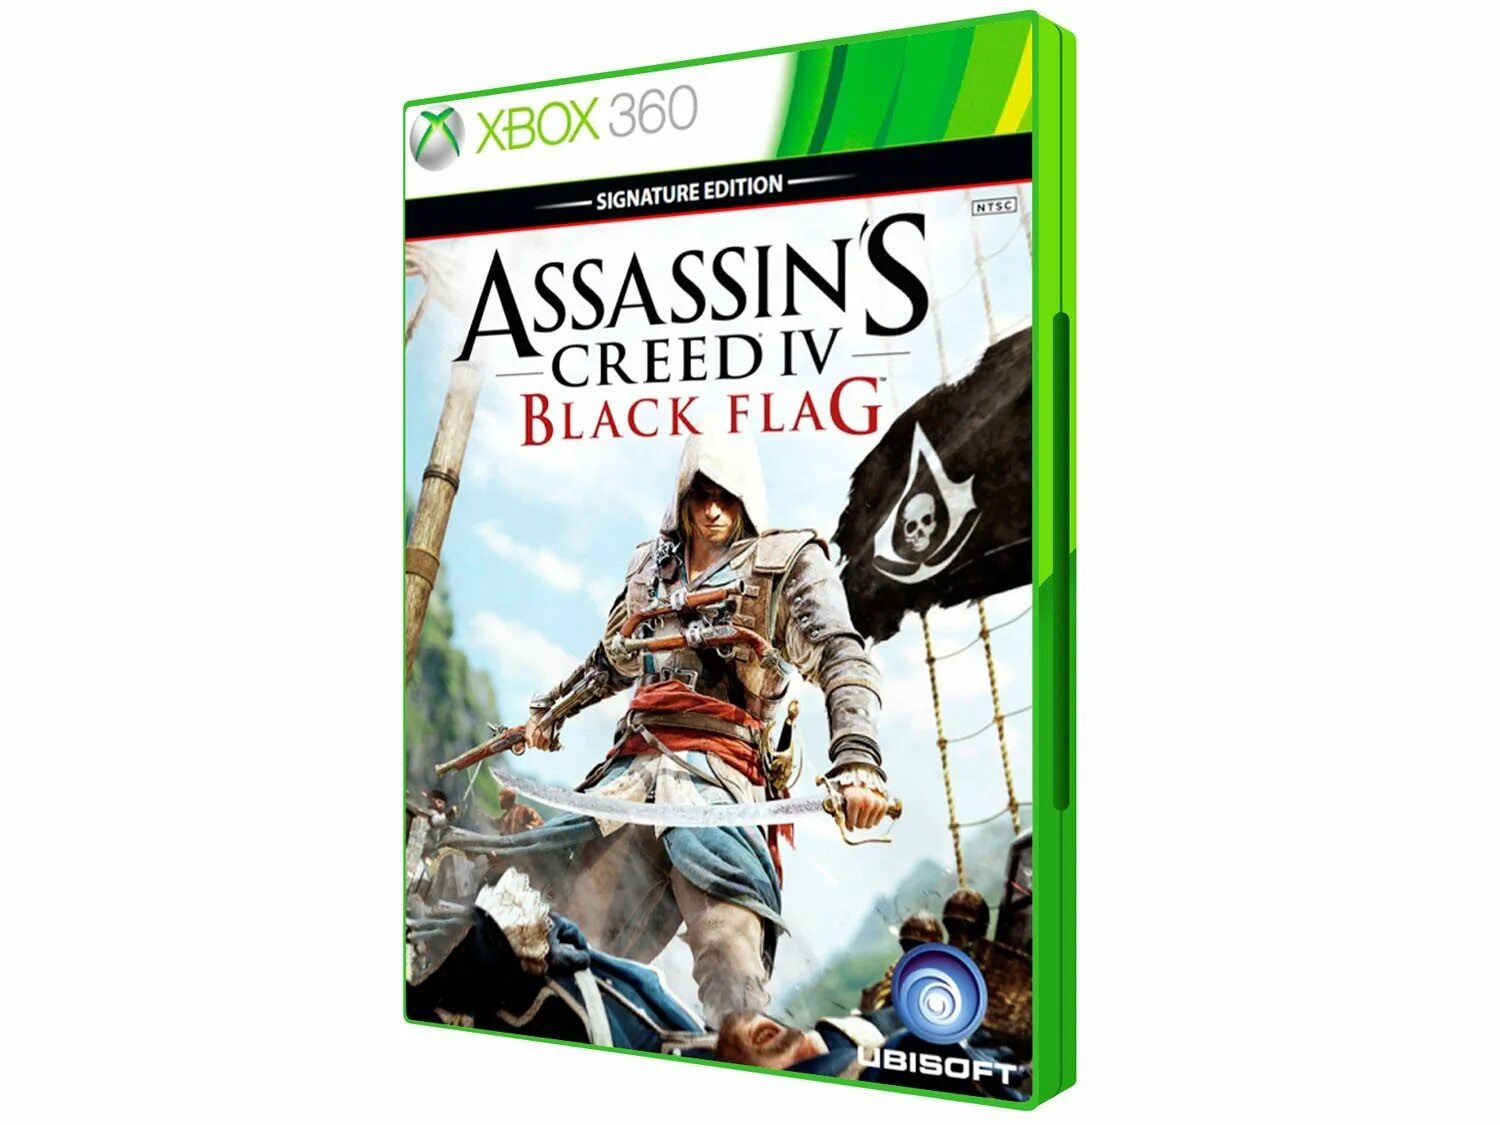 Assassin's Creed Xbox 360 диск. Диск ассасин Крид 4 на хбокс 360. Assassin's Creed 4 диски Xbox 360. Assassin's Creed Black Flag Xbox 360. Assassin s xbox 360